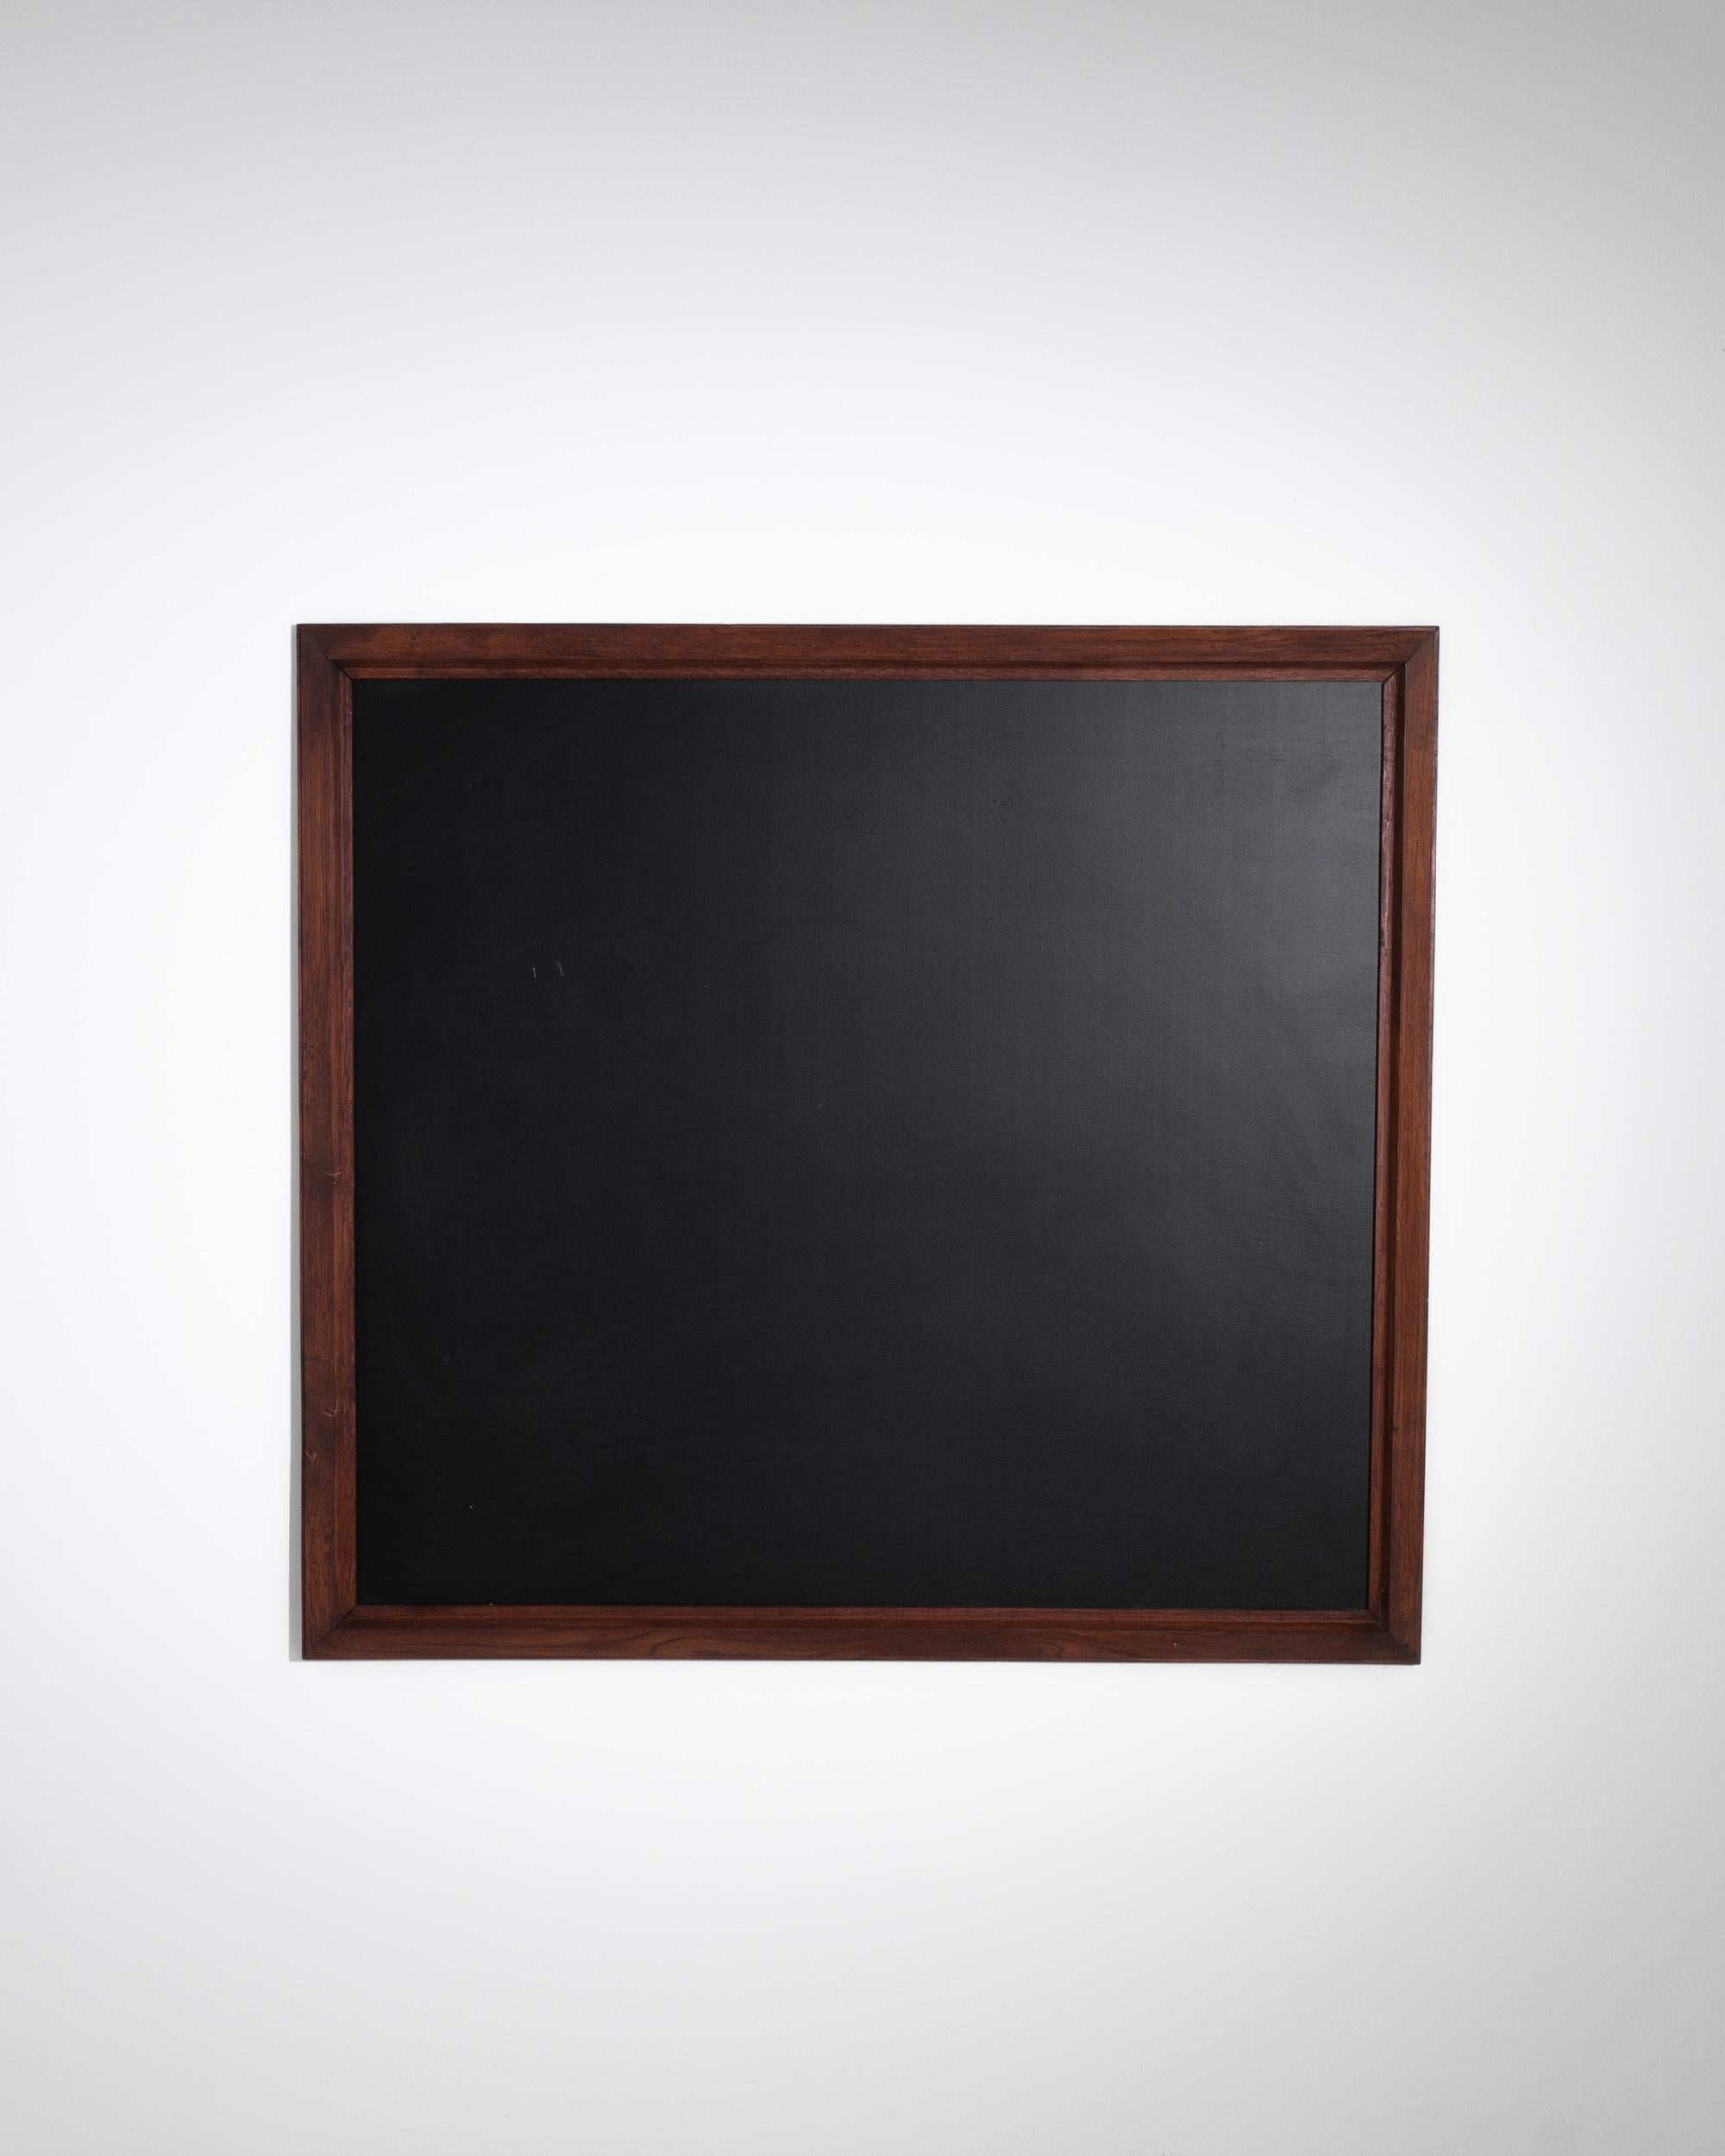 A wooden black board from France, produced circa 1900. Stretching four feet wide and standing nearly as tall, this scholastic rectangle will stir memories of childhood school days: soft whisper of deftly handled chalk carving yellow lessons into the